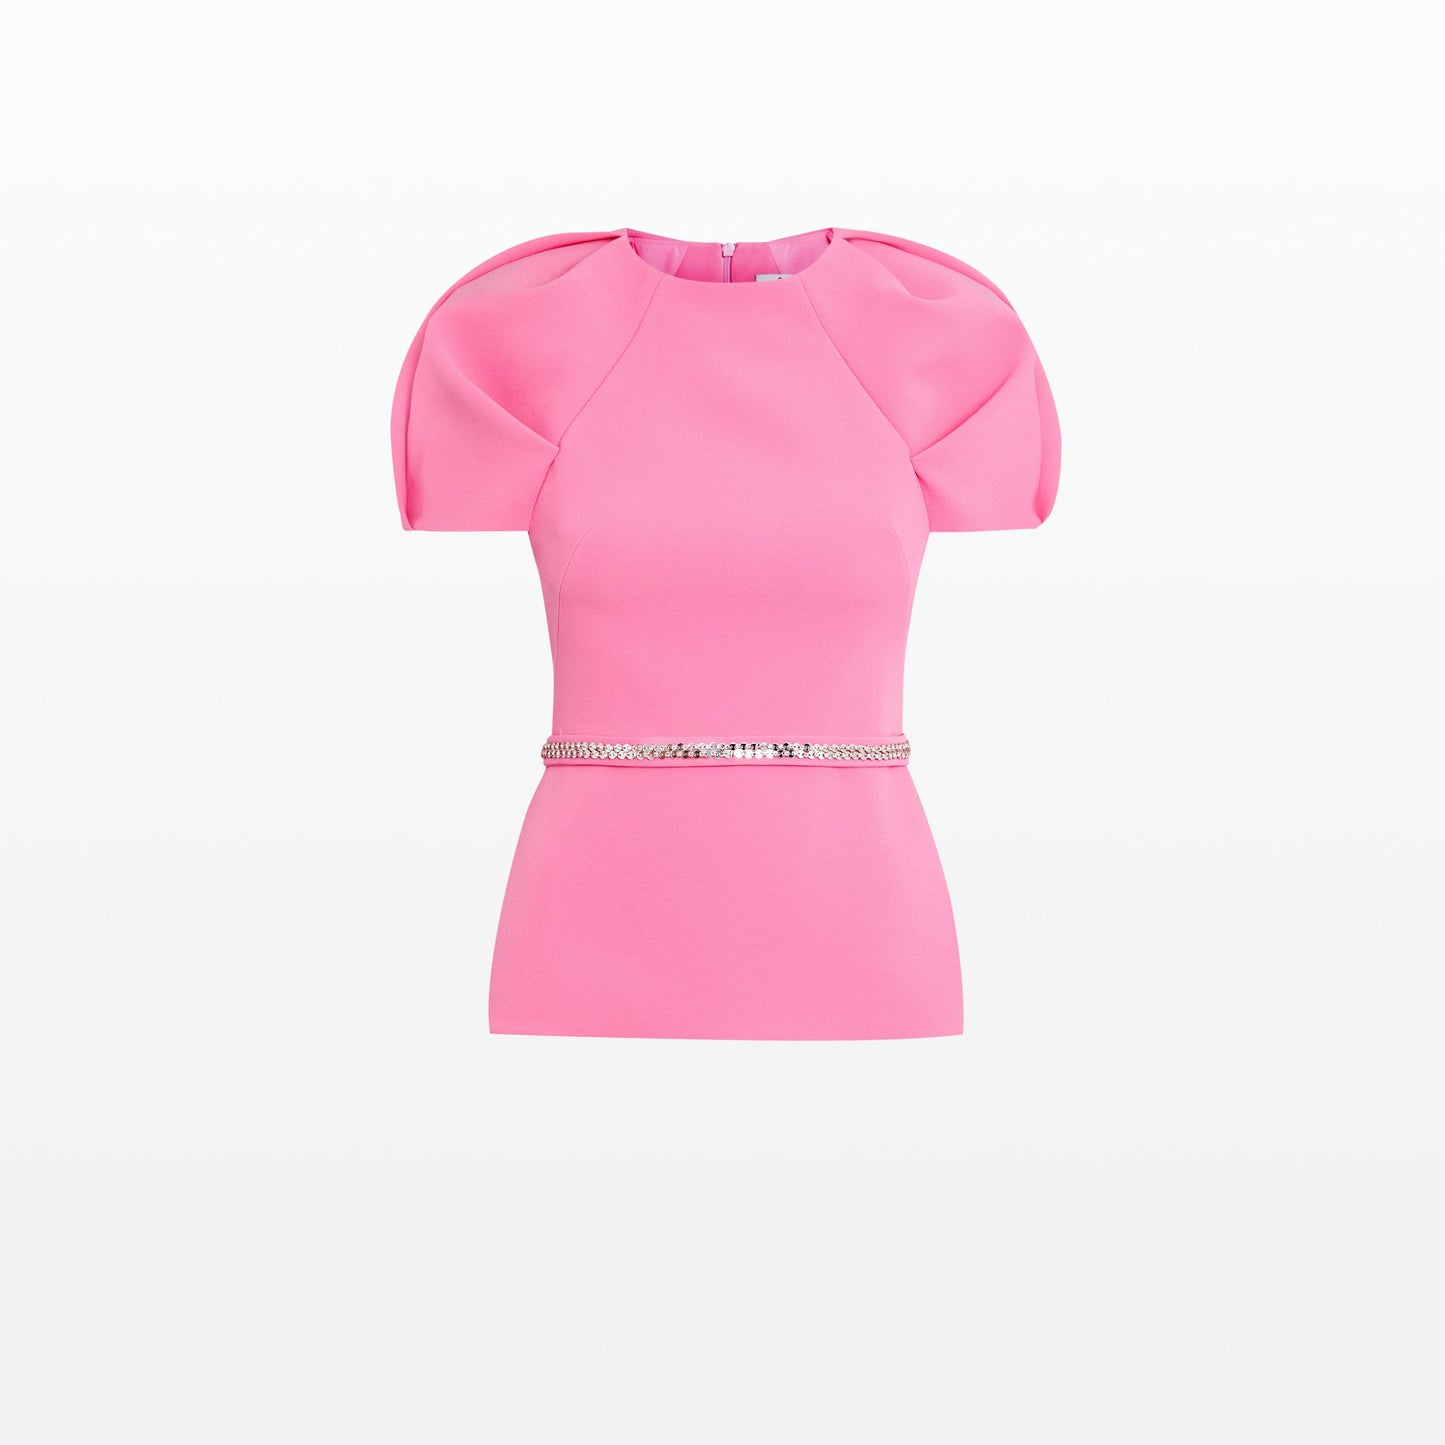 Brea Aurora Top With Embroidered Belt